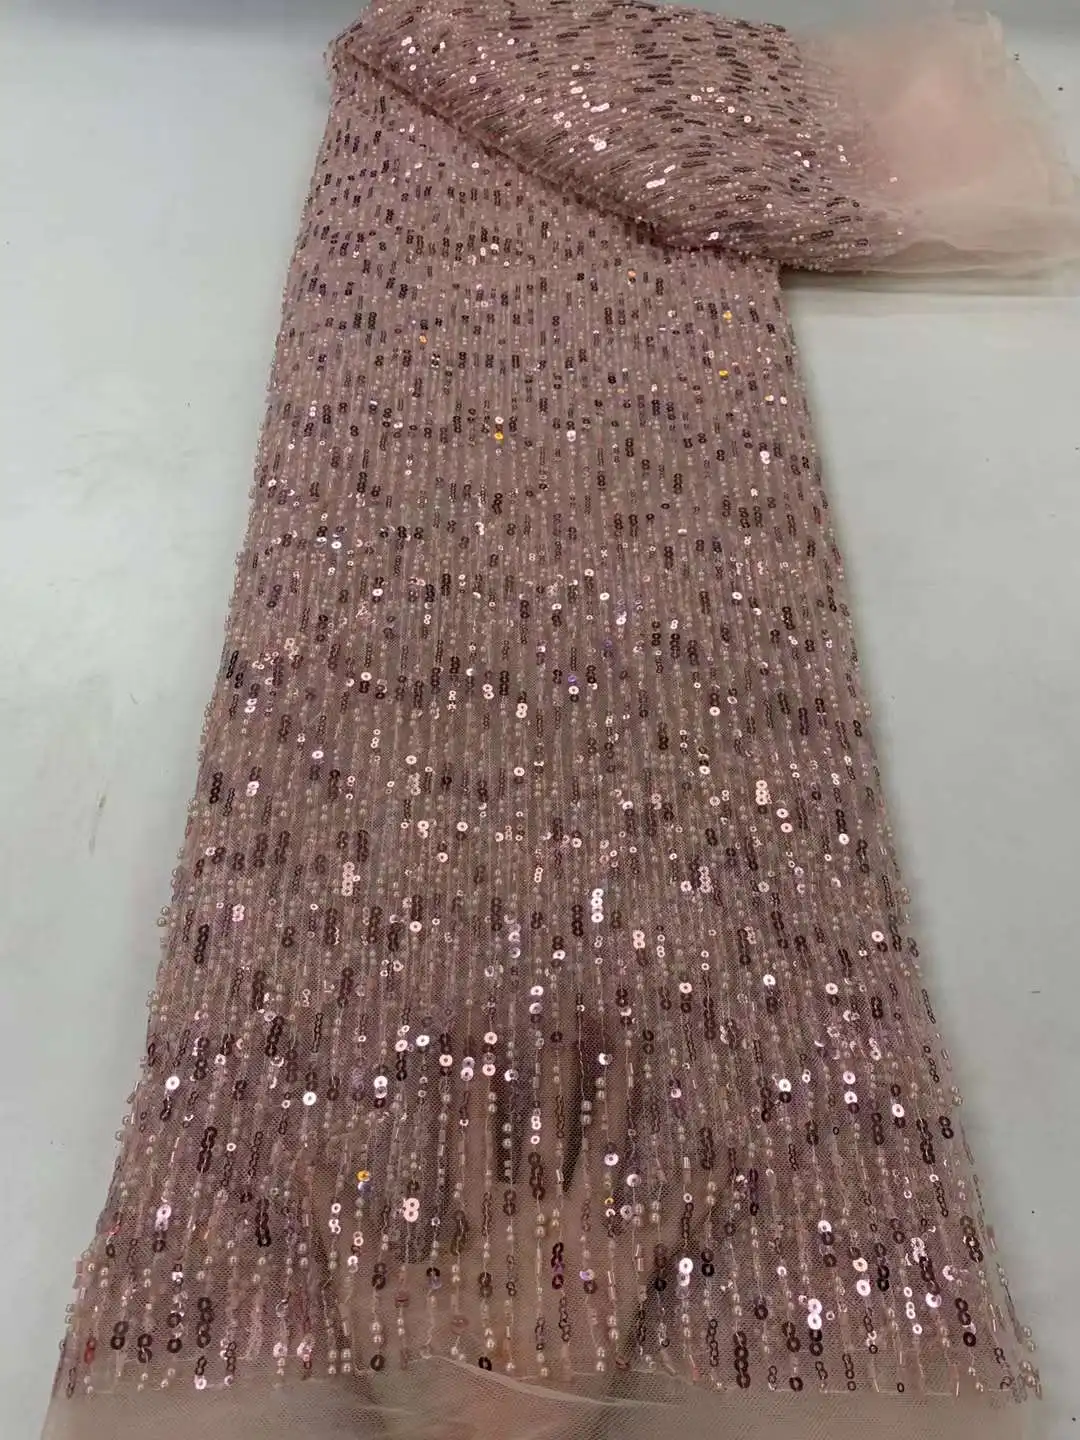 Latest African Sequins Lace Fabric 2024 High Quality Lace Beads Material French Nigerian Net Lace Fabric For Women Wedding Party beads sequins embroidery african lacetulle mesh fabric 2021 high quality nigerian net lace fabrics for women party wedding fb17